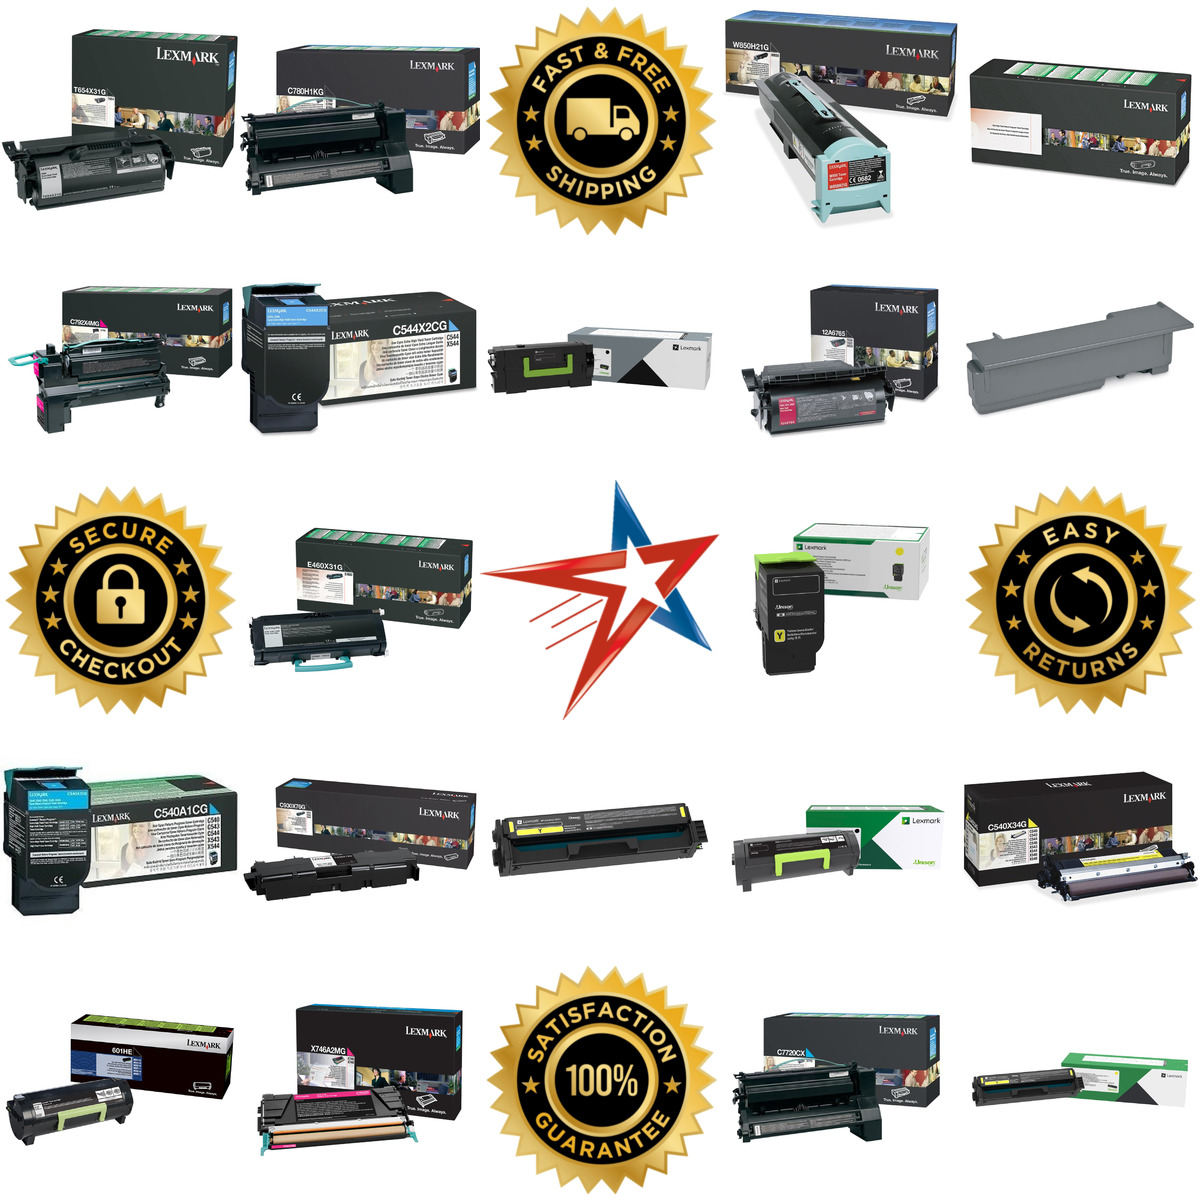 A selection of Lexmark International inc. products on GoVets